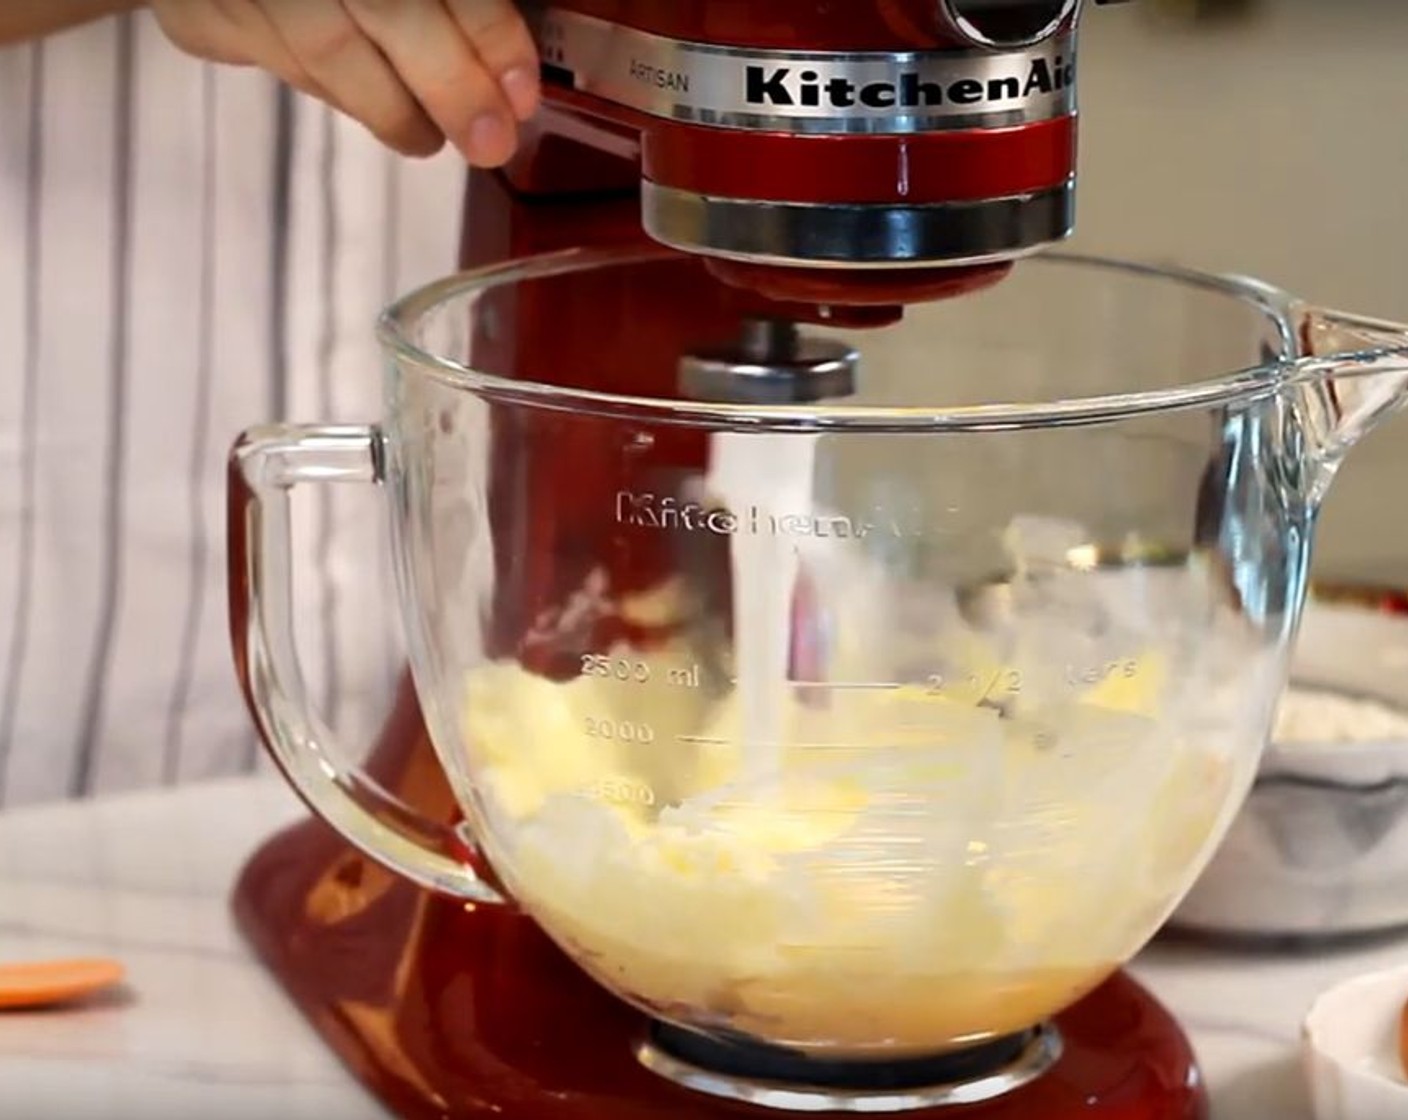 step 2 In a mixer or mixing bowl, cream Unsalted Butter (1 cup) and Granulated Sugar (1 cup) until light and fluffy.